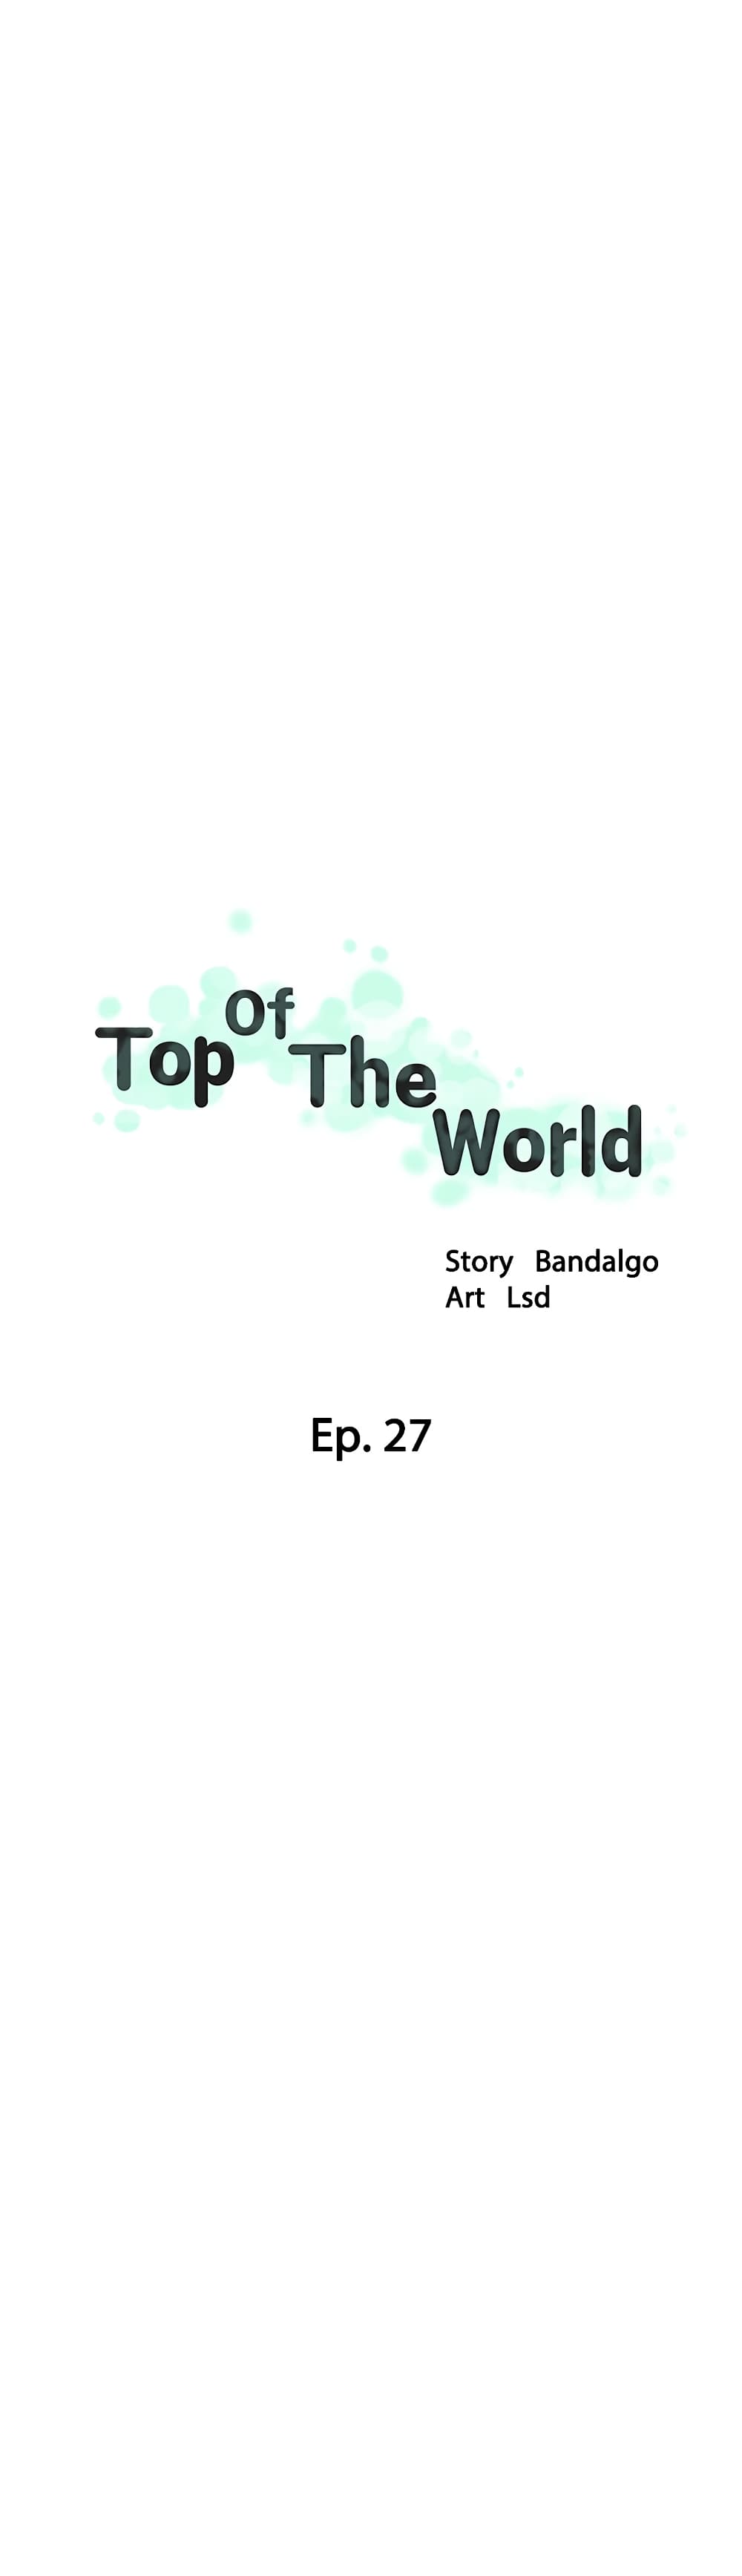 Top Of The World 27-27